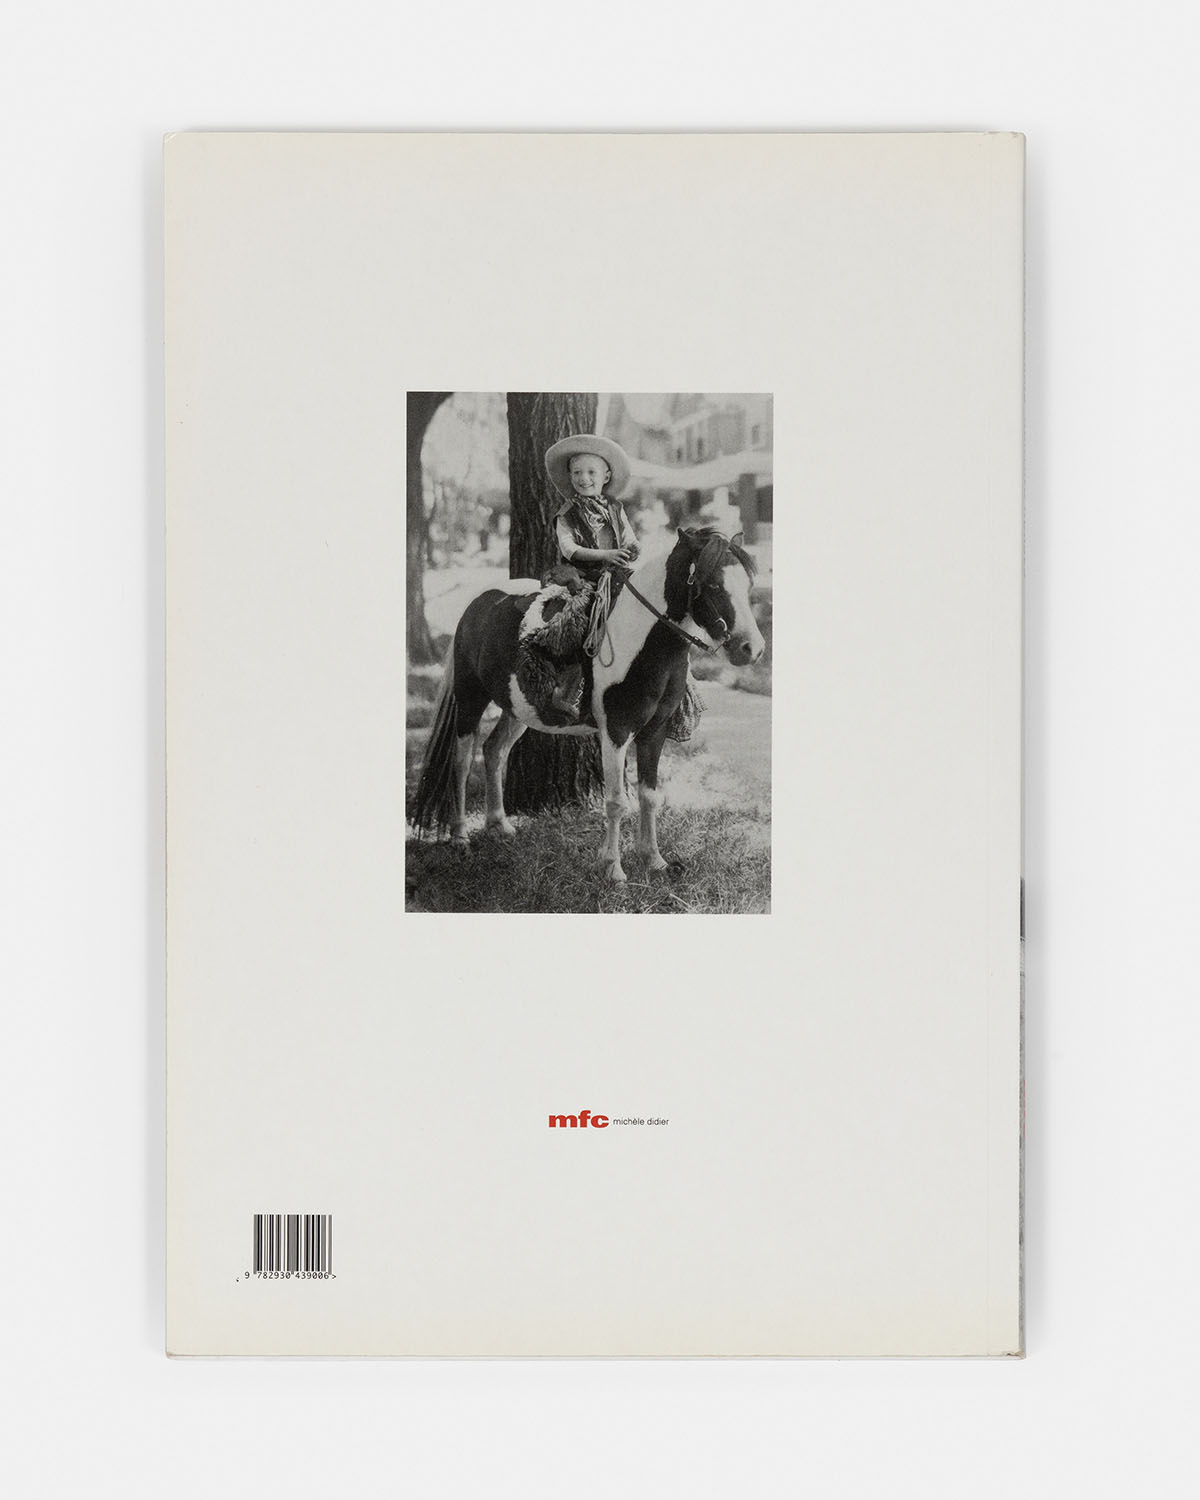 Hurting Horses, 2005 - Vue suppl&eacute;mentaire